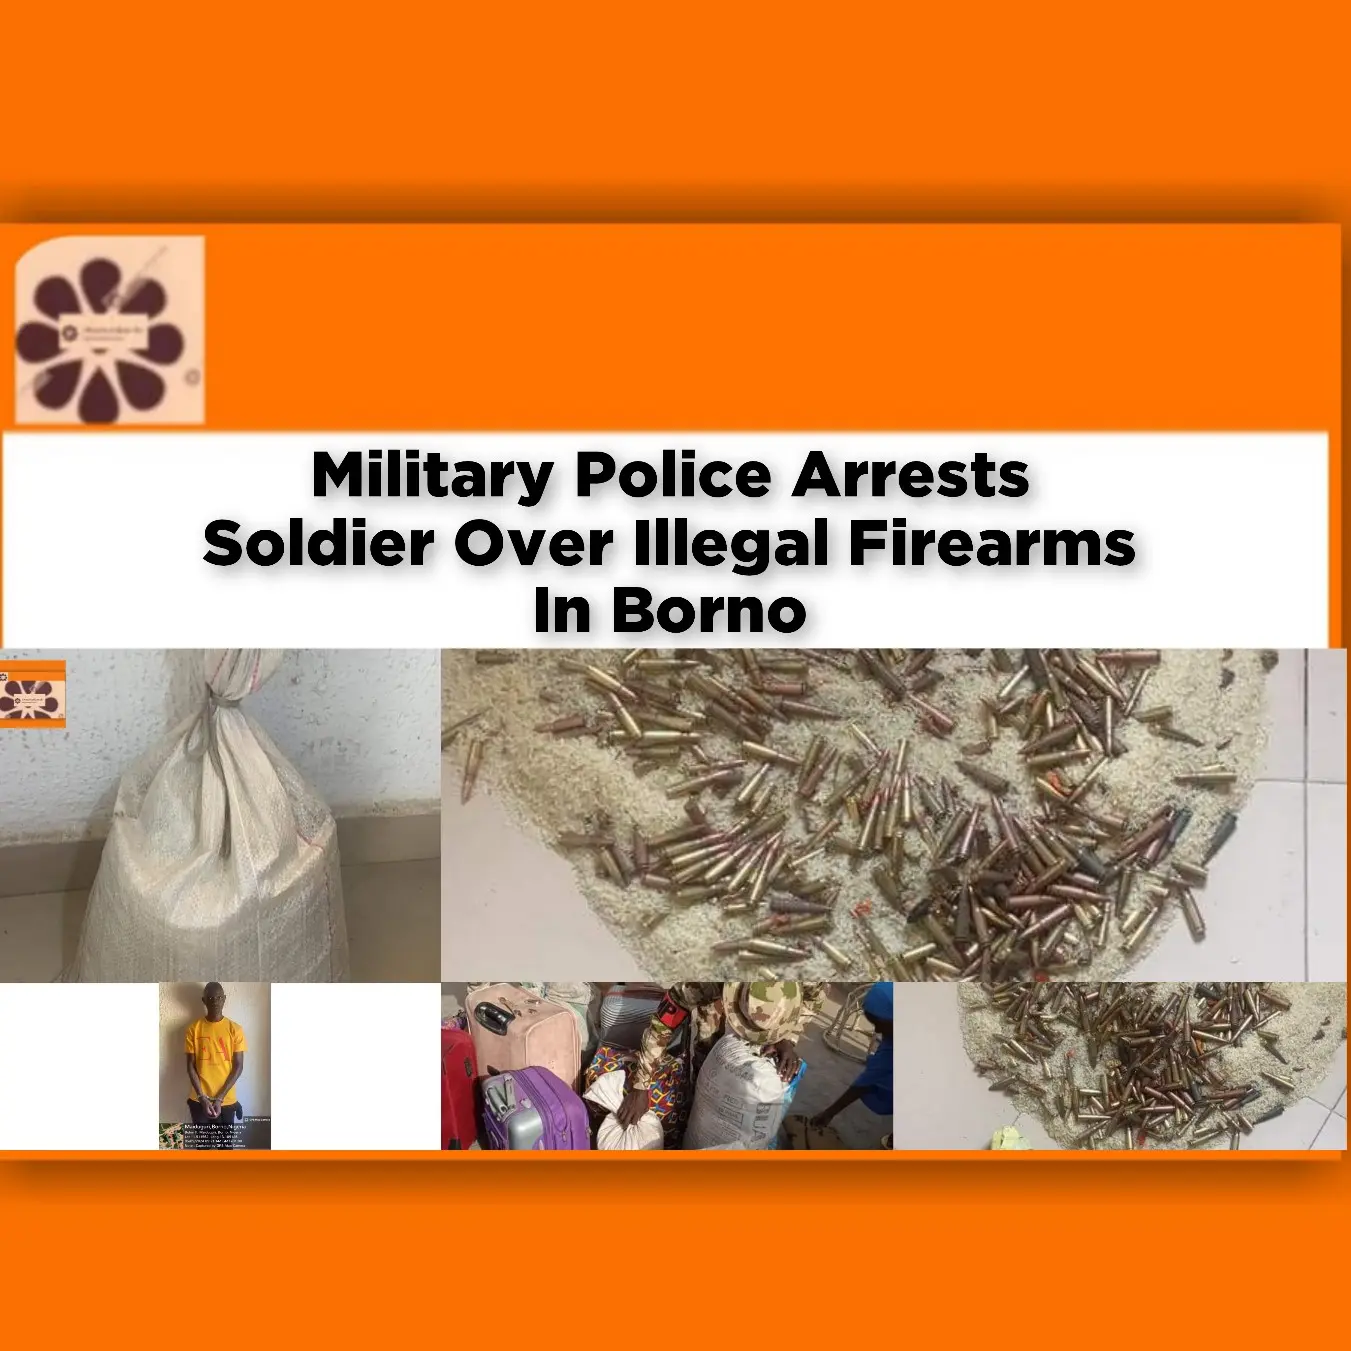 Military Police Arrests Soldier Over Illegal Firearms In Borno ~ OsazuwaAkonedo #Landlords